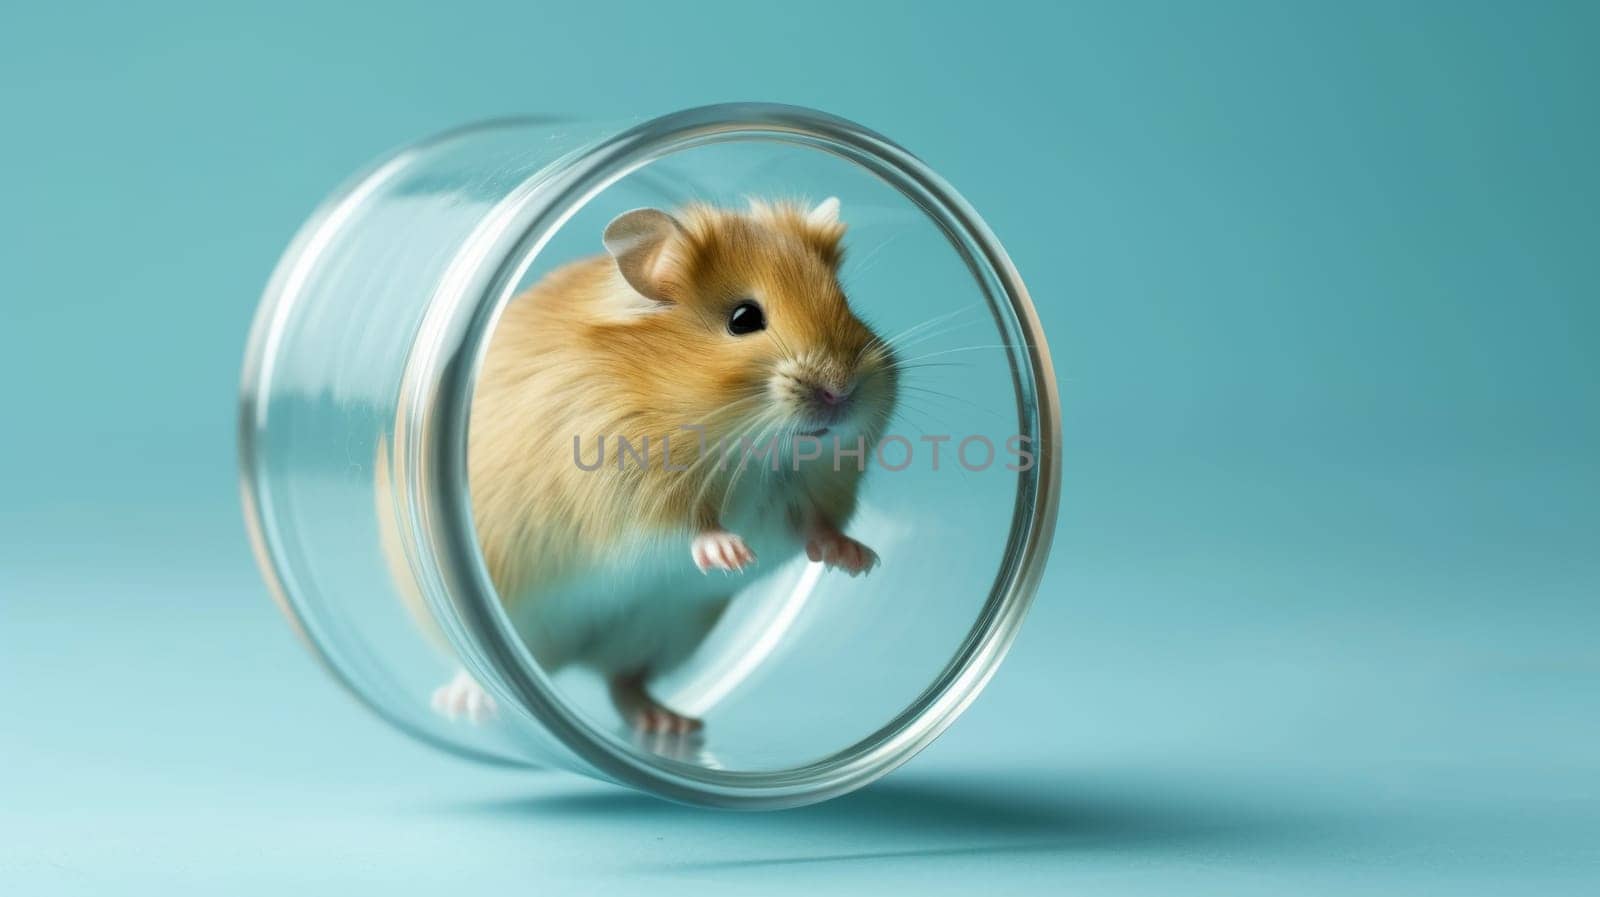 A hamster inside a glass bowl on blue background, AI by starush